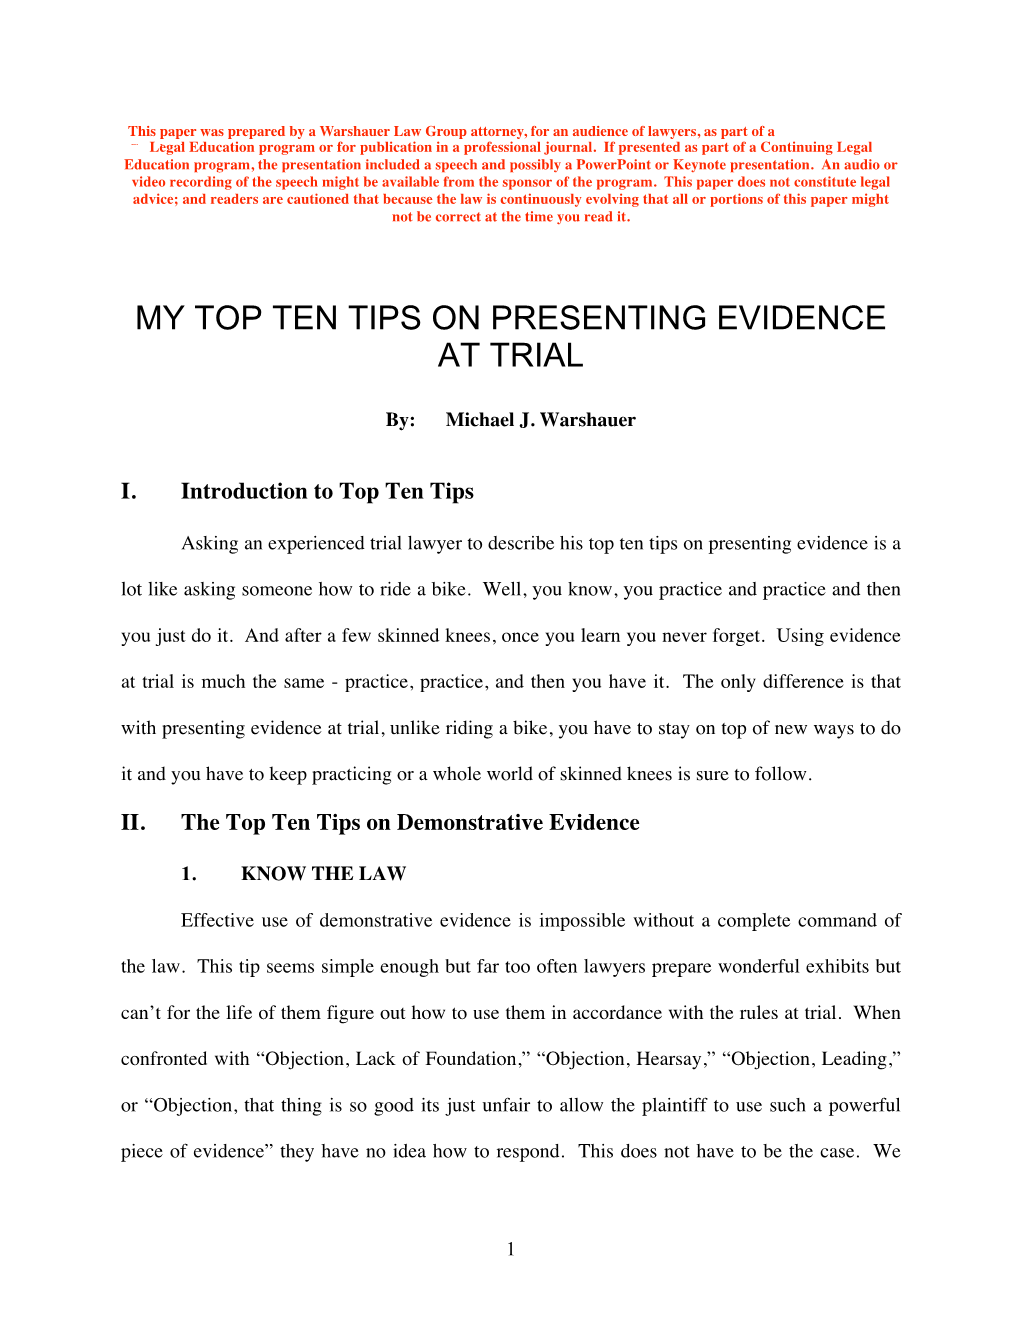 My Top Ten Tips on Presenting Evidence at Trial